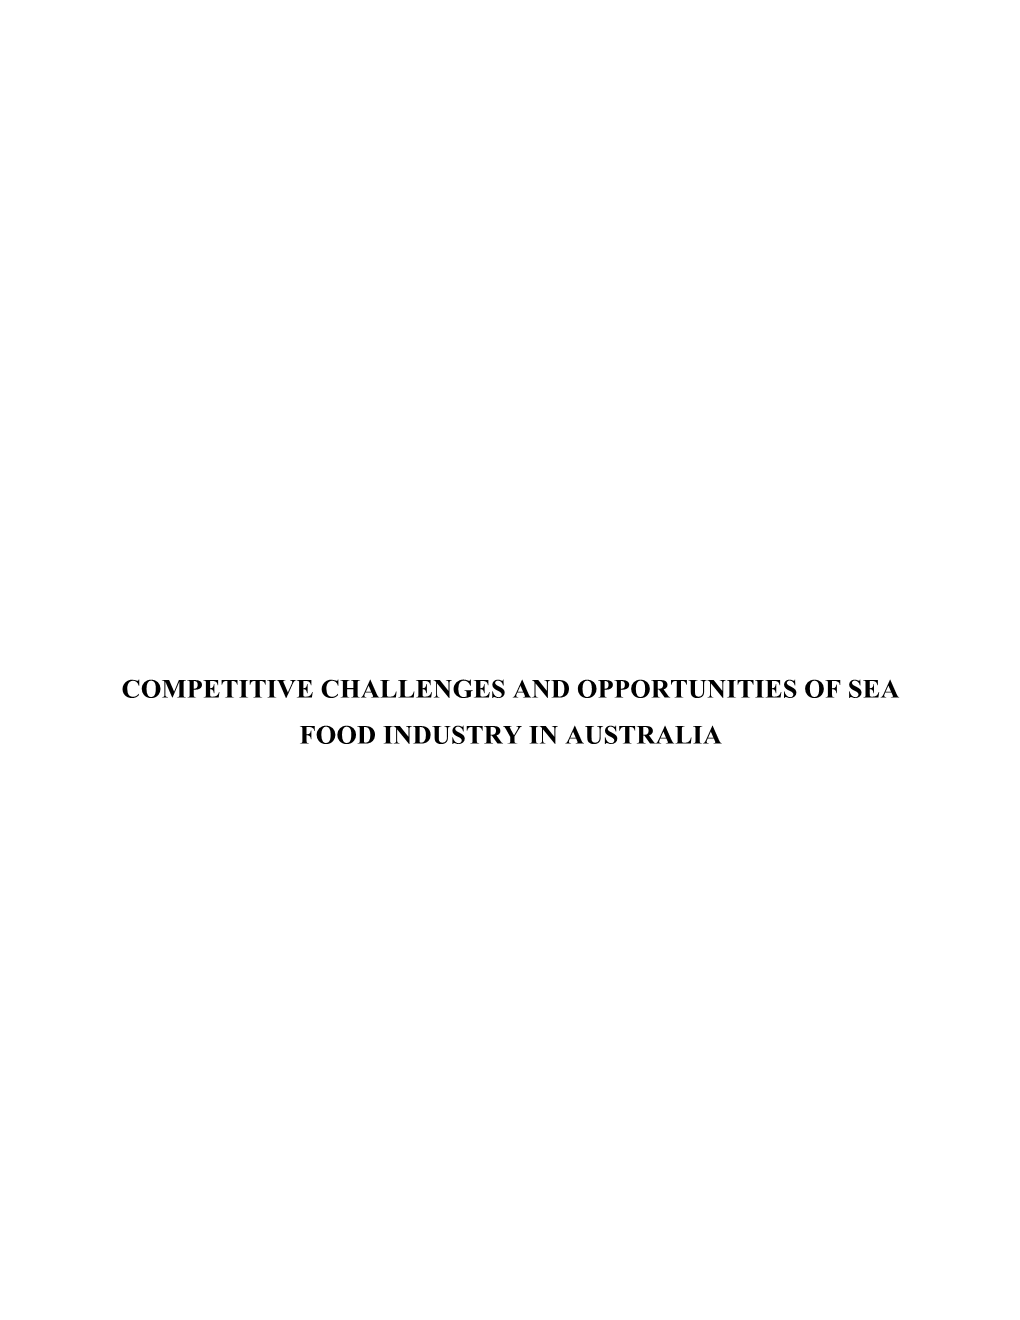 Competitive Challenges and Opportunities of Sea Food Industry in Australia